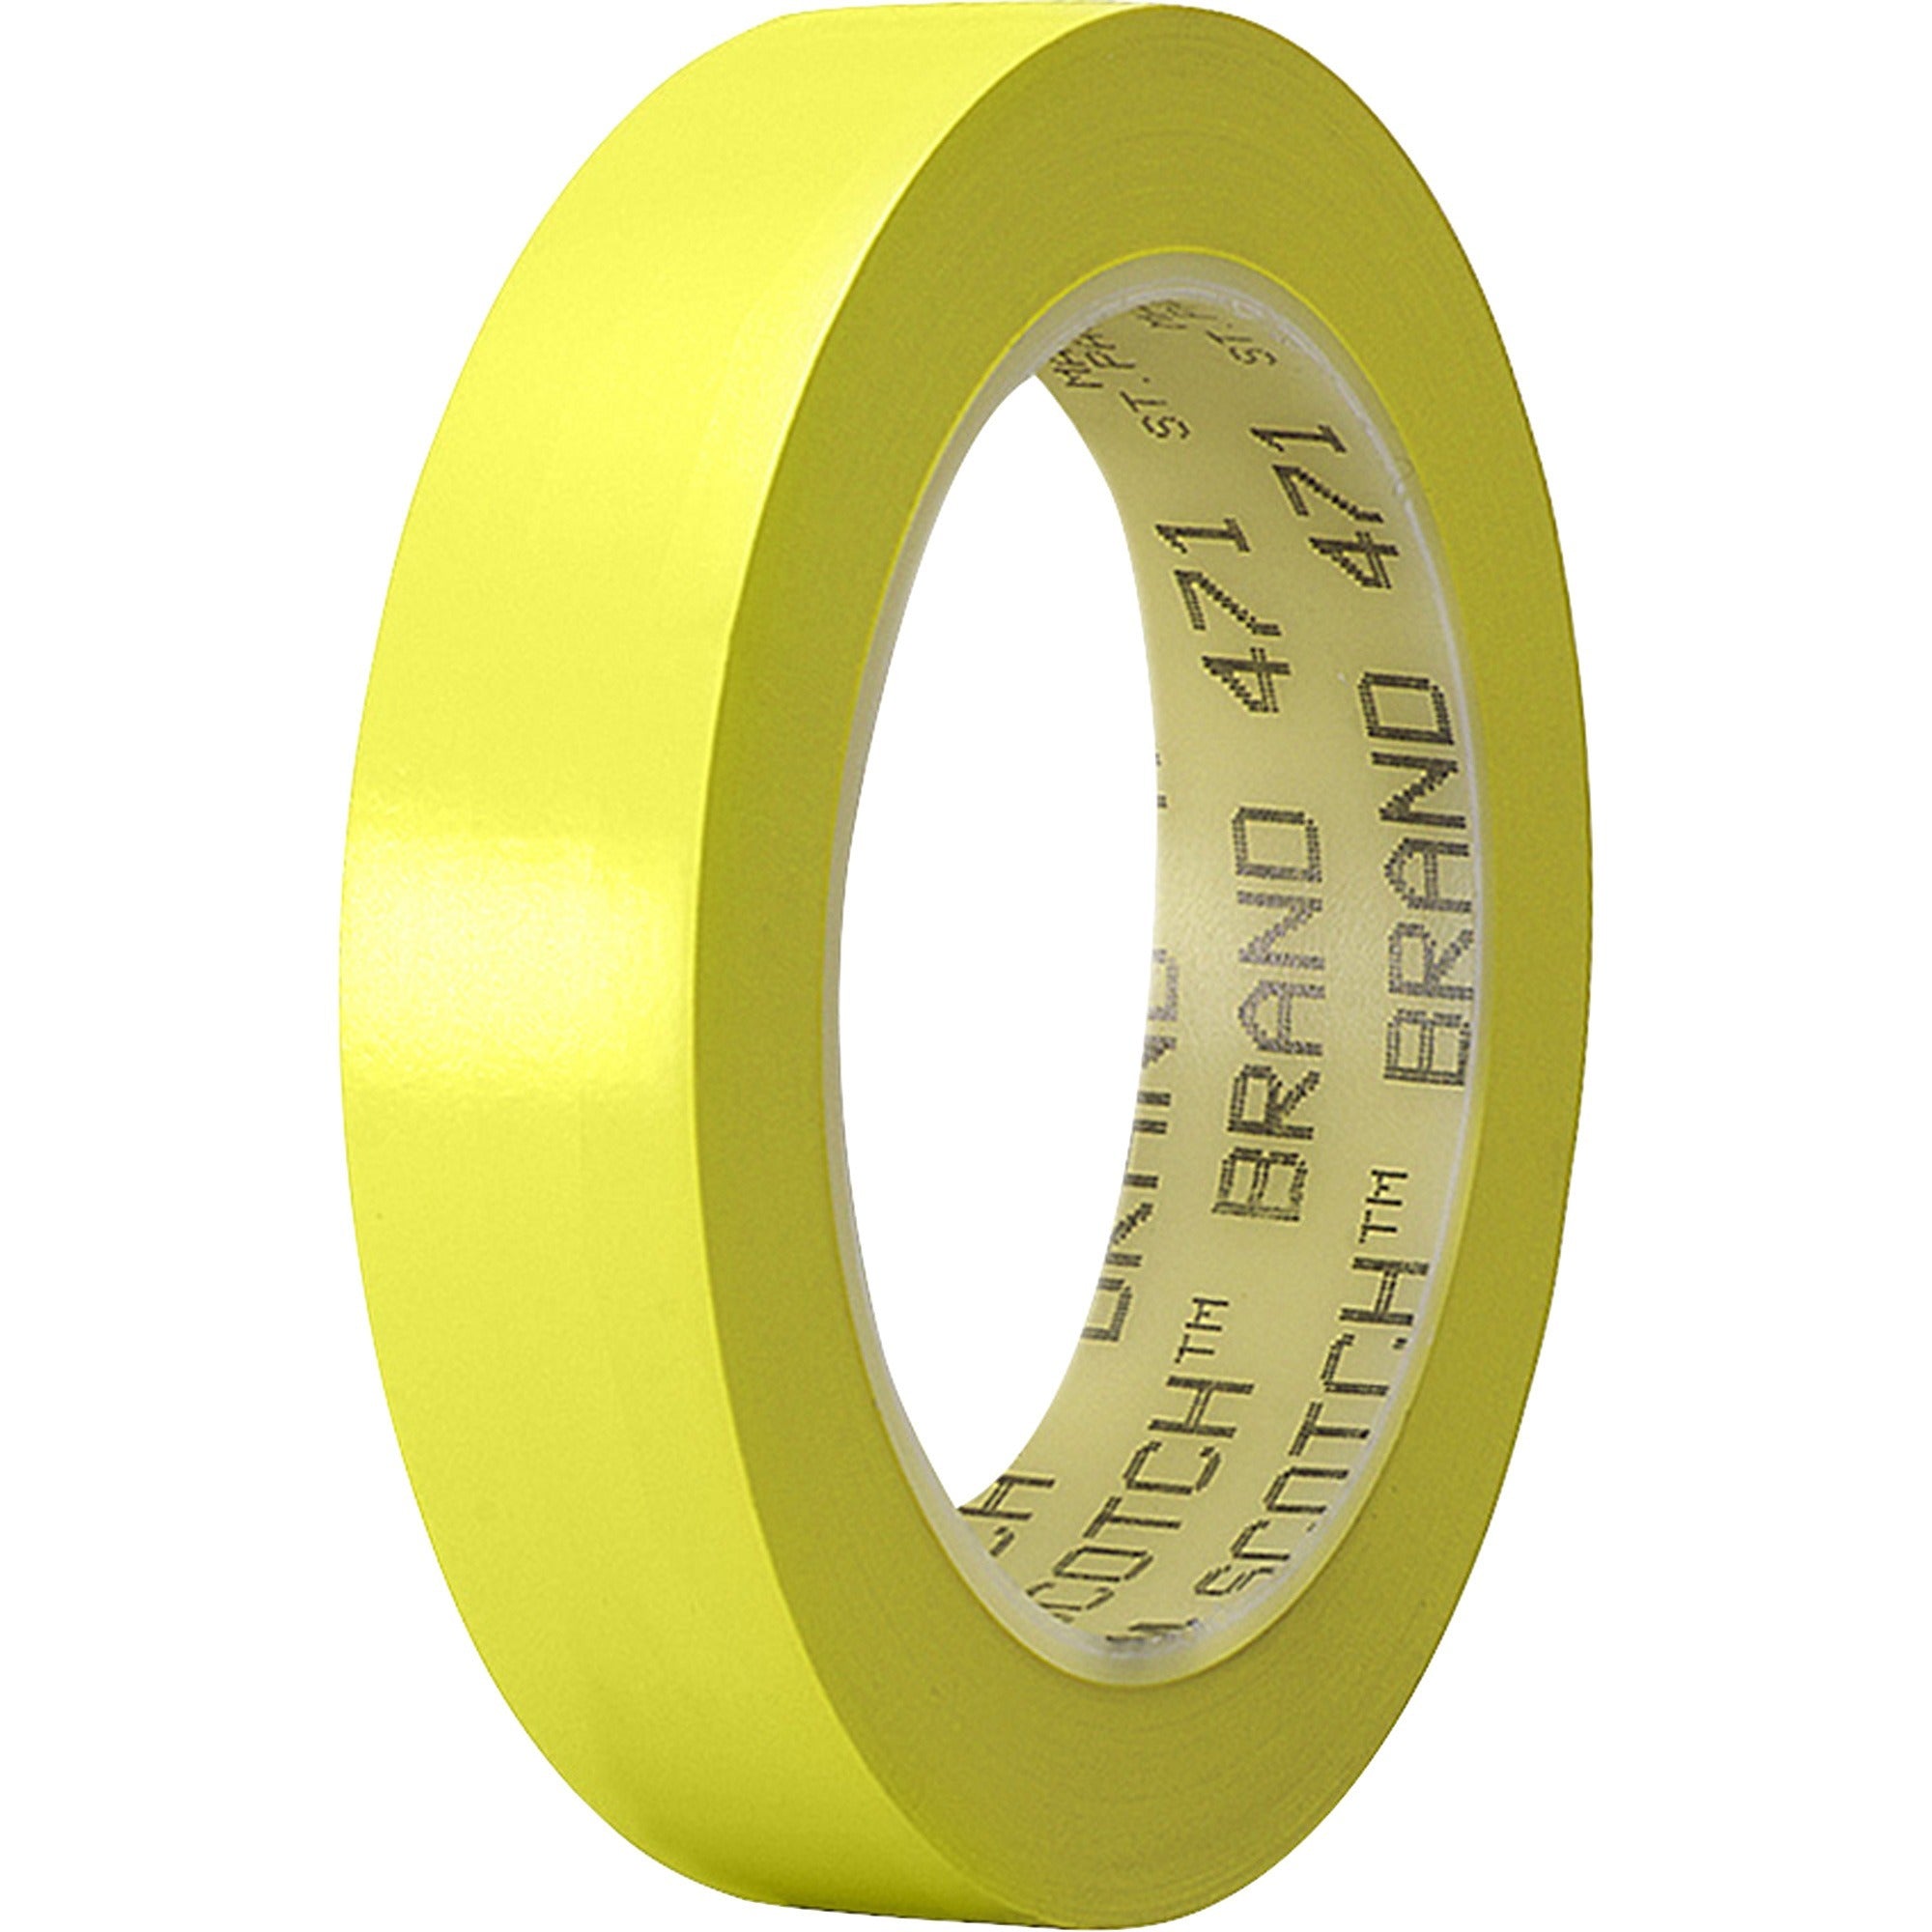 3M Marking Tape - 36 yd Length x 1" Width - 3" Core - Vinyl - Solvent Resistant - For Color Coding, Abrasion Protection, Decorating, Sealing, Patching, Splicing, Wrapping - 1 / Roll - Yellow - 